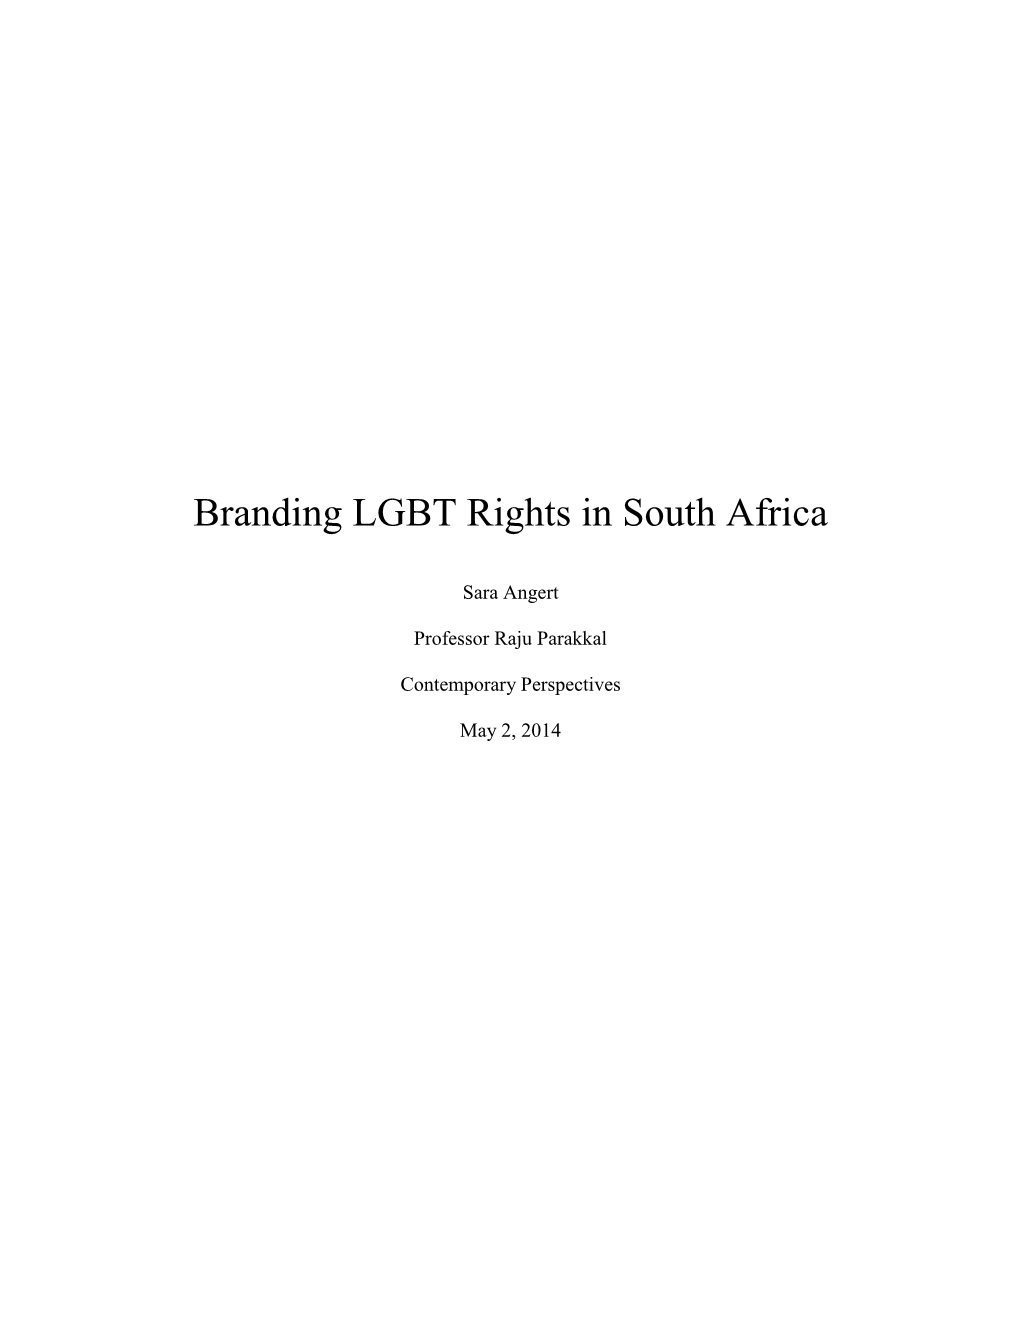 Branding LGBT Rights in South Africa